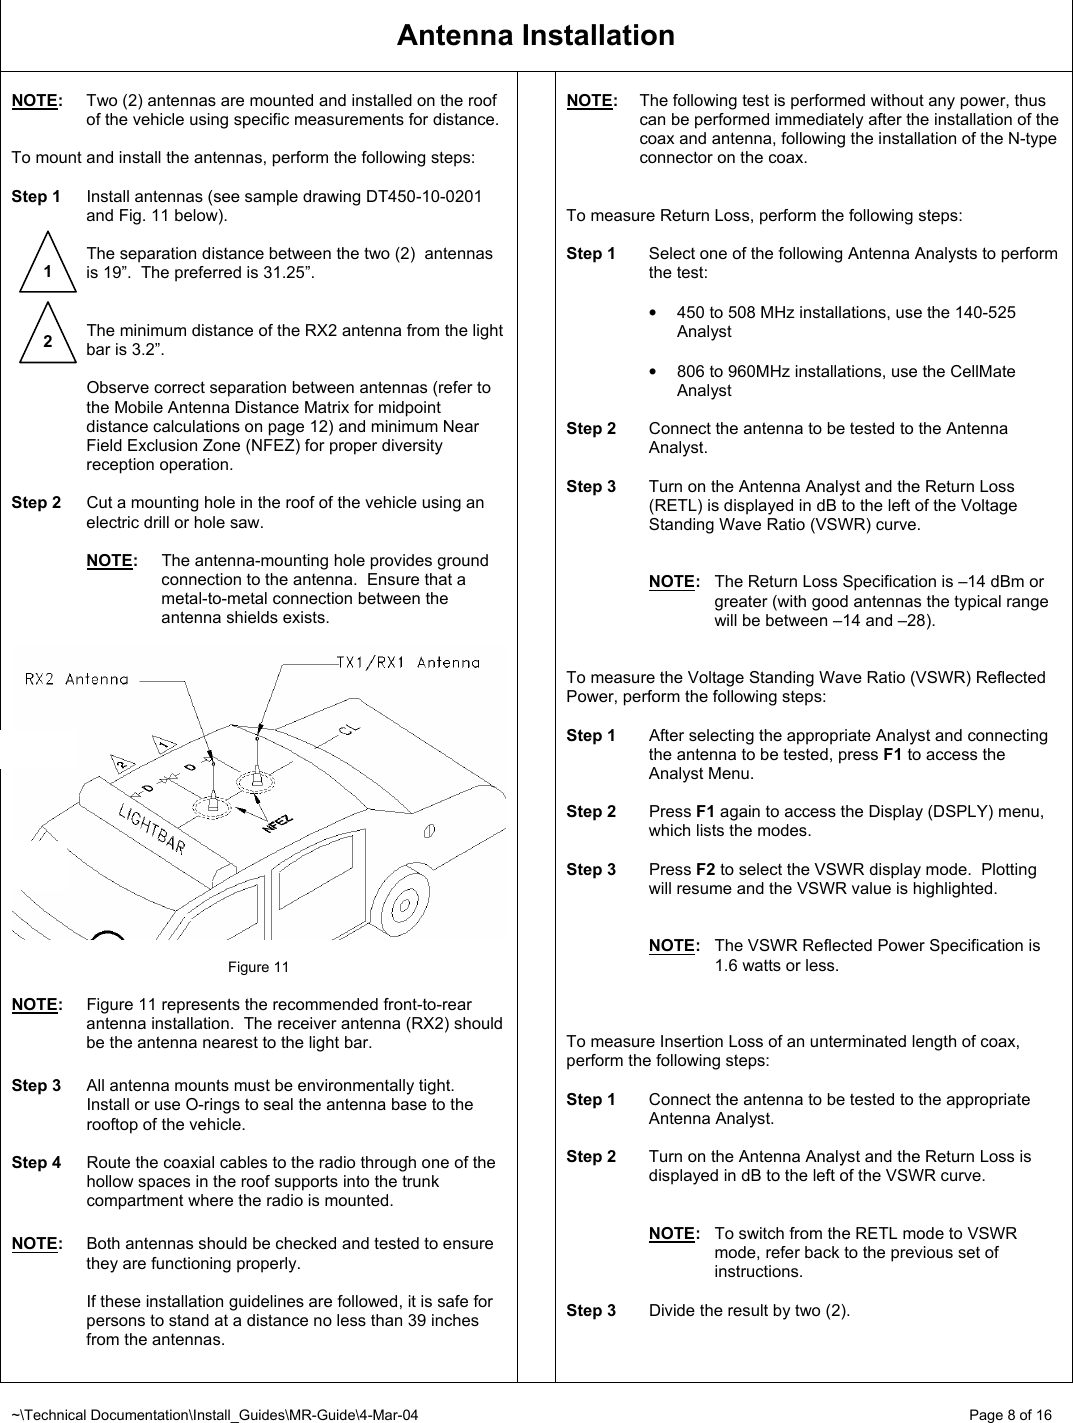 ~\Technical Documentation\Install_Guides\MR-Guide\4-Mar-04   Page 8 of 16 Antenna Installation  NOTE:  Two (2) antennas are mounted and installed on the roof of the vehicle using specific measurements for distance.  To mount and install the antennas, perform the following steps:  Step 1  Install antennas (see sample drawing DT450-10-0201 and Fig. 11 below).    The separation distance between the two (2)  antennas is 19”.  The preferred is 31.25”.      The minimum distance of the RX2 antenna from the light bar is 3.2”.    Observe correct separation between antennas (refer to the Mobile Antenna Distance Matrix for midpoint distance calculations on page 12) and minimum Near Field Exclusion Zone (NFEZ) for proper diversity reception operation.  Step 2  Cut a mounting hole in the roof of the vehicle using an electric drill or hole saw.   NOTE:  The antenna-mounting hole provides ground connection to the antenna.  Ensure that a metal-to-metal connection between the antenna shields exists.     Figure 11  NOTE:  Figure 11 represents the recommended front-to-rear antenna installation.  The receiver antenna (RX2) should be the antenna nearest to the light bar.  Step 3  All antenna mounts must be environmentally tight.  Install or use O-rings to seal the antenna base to the rooftop of the vehicle.  Step 4  Route the coaxial cables to the radio through one of the hollow spaces in the roof supports into the trunk compartment where the radio is mounted.  NOTE:  Both antennas should be checked and tested to ensure they are functioning properly.    If these installation guidelines are followed, it is safe for persons to stand at a distance no less than 39 inches from the antennas.   NOTE:  The following test is performed without any power, thus can be performed immediately after the installation of the coax and antenna, following the installation of the N-type connector on the coax.    To measure Return Loss, perform the following steps:  Step 1  Select one of the following Antenna Analysts to perform the test:  •  450 to 508 MHz installations, use the 140-525 Analyst  •  806 to 960MHz installations, use the CellMate Analyst  Step 2  Connect the antenna to be tested to the Antenna Analyst.  Step 3  Turn on the Antenna Analyst and the Return Loss (RETL) is displayed in dB to the left of the Voltage Standing Wave Ratio (VSWR) curve.   NOTE:  The Return Loss Specification is –14 dBm or greater (with good antennas the typical range will be between –14 and –28).   To measure the Voltage Standing Wave Ratio (VSWR) Reflected Power, perform the following steps:  Step 1  After selecting the appropriate Analyst and connecting the antenna to be tested, press F1 to access the Analyst Menu.    Step 2 Press F1 again to access the Display (DSPLY) menu, which lists the modes.  Step 3 Press F2 to select the VSWR display mode.  Plotting will resume and the VSWR value is highlighted.   NOTE:  The VSWR Reflected Power Specification is 1.6 watts or less.    To measure Insertion Loss of an unterminated length of coax, perform the following steps:  Step 1  Connect the antenna to be tested to the appropriate Antenna Analyst.  Step 2  Turn on the Antenna Analyst and the Return Loss is displayed in dB to the left of the VSWR curve.   NOTE:  To switch from the RETL mode to VSWR mode, refer back to the previous set of instructions.  Step 3  Divide the result by two (2).  1 2 